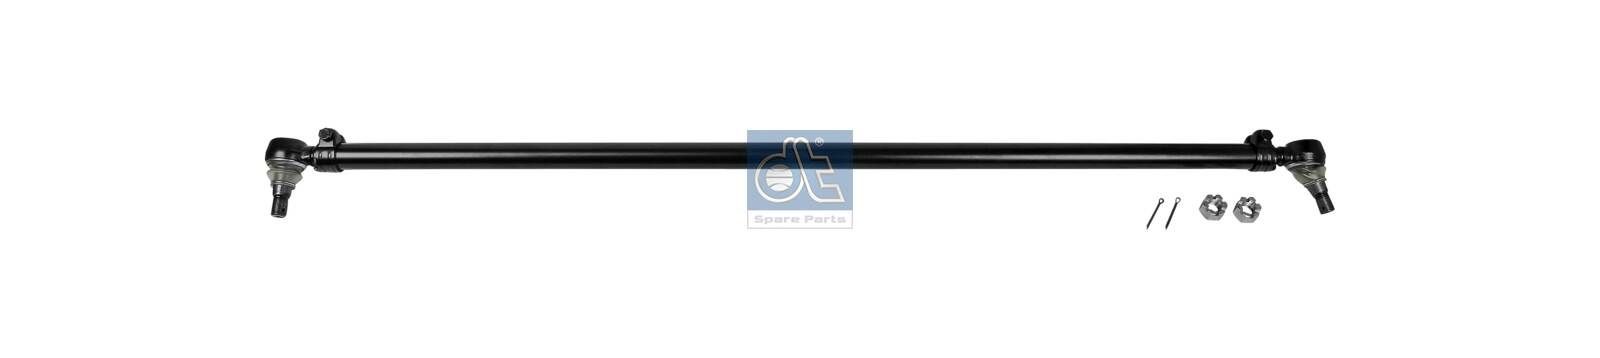 DT Spare Parts 2.53116 Rod Assembly 22325737